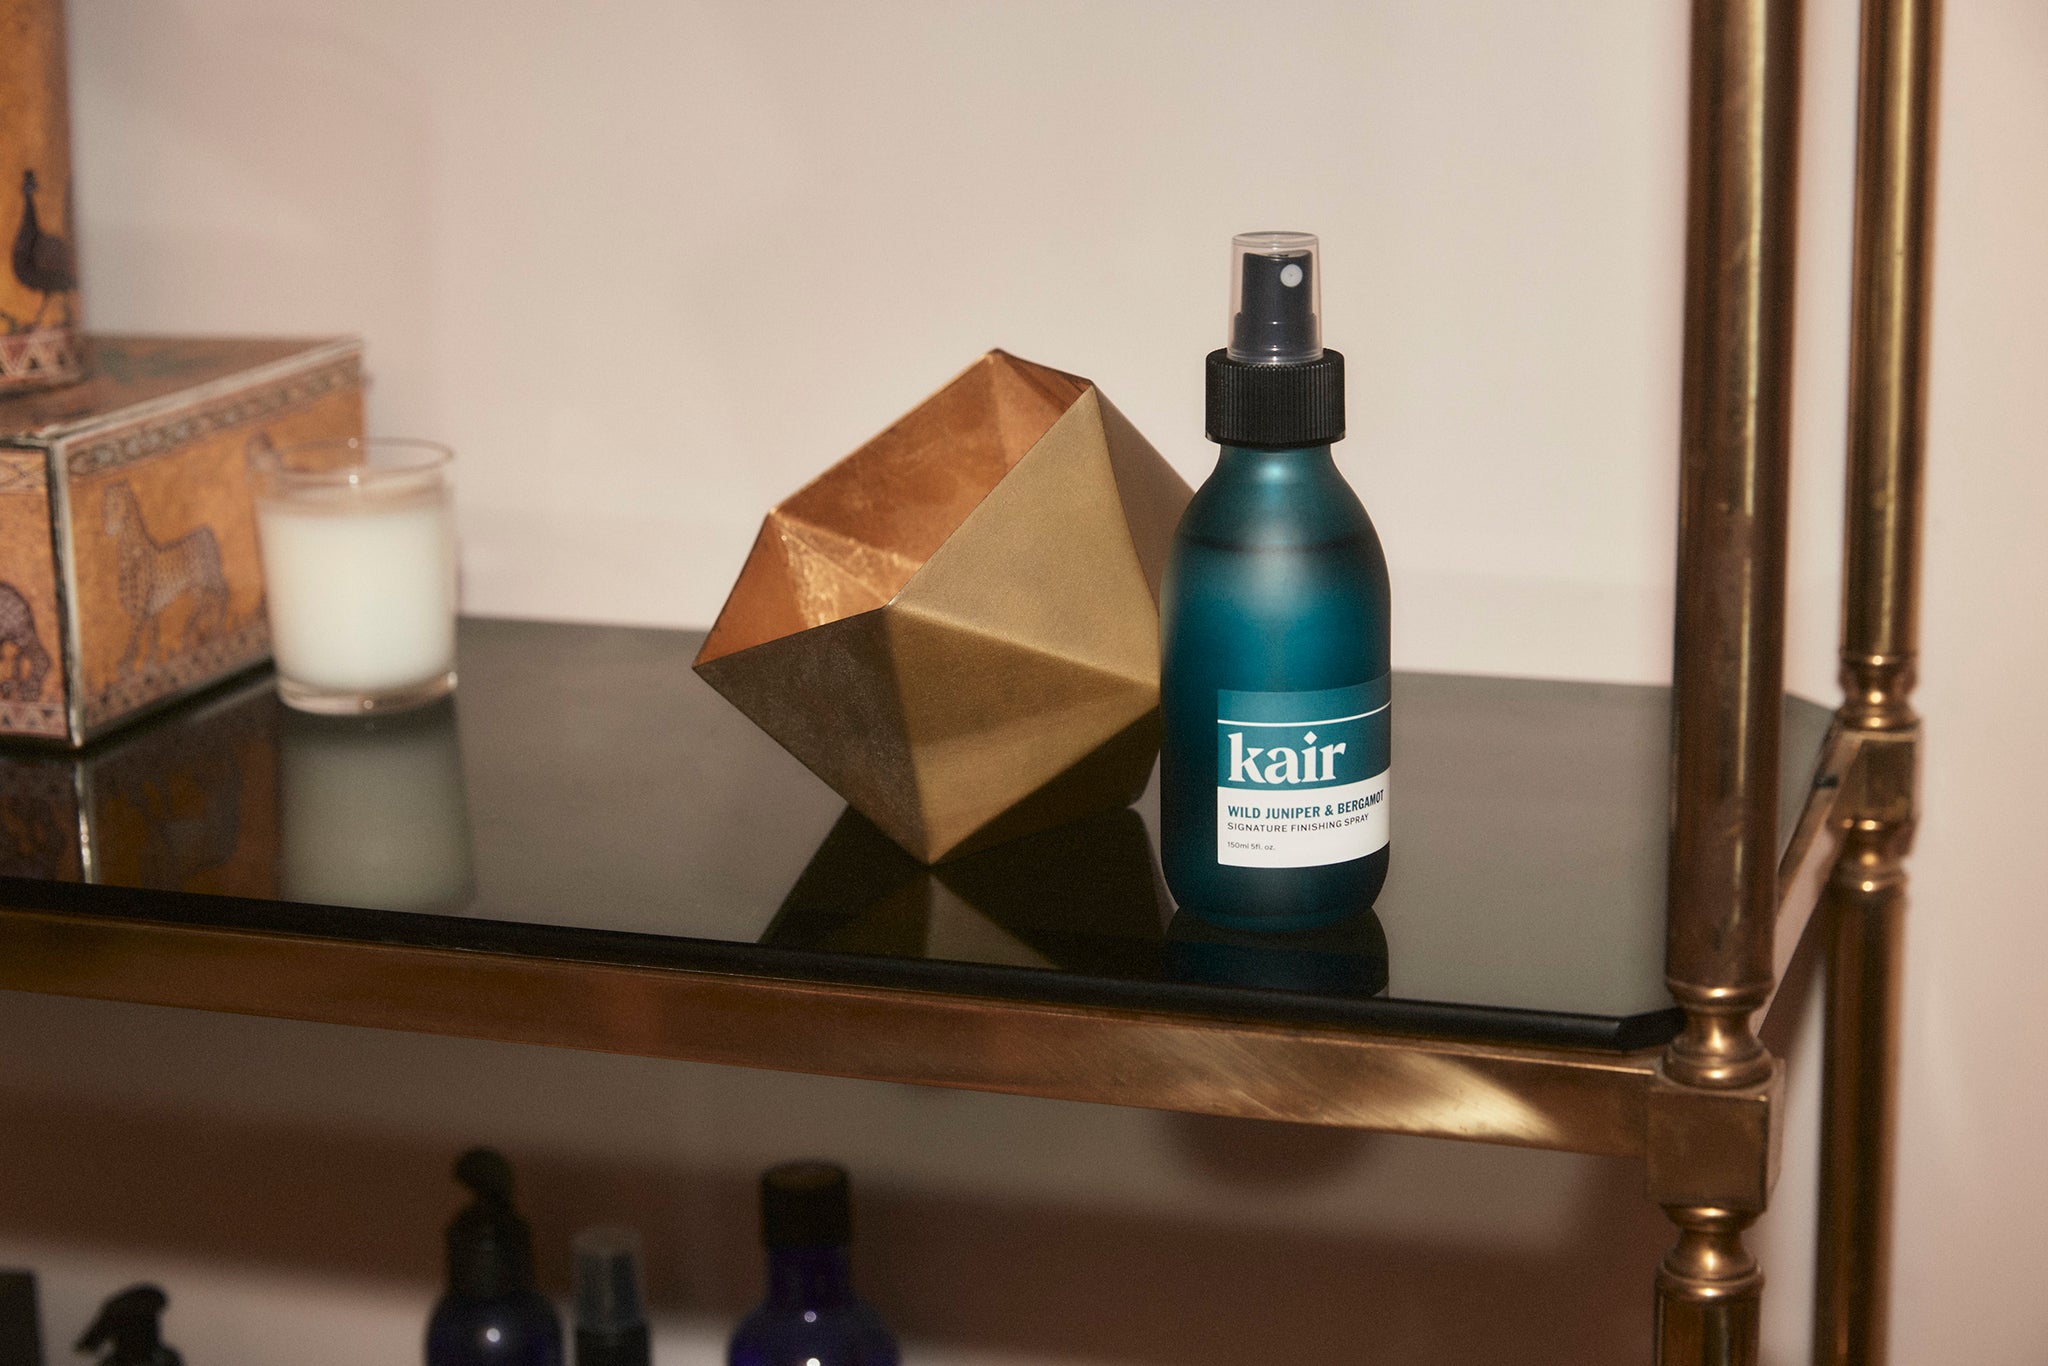 Kair Signature Finishing Spray in Wild Juniper & Bergamot, on a shelf next to a candle and gold ornament